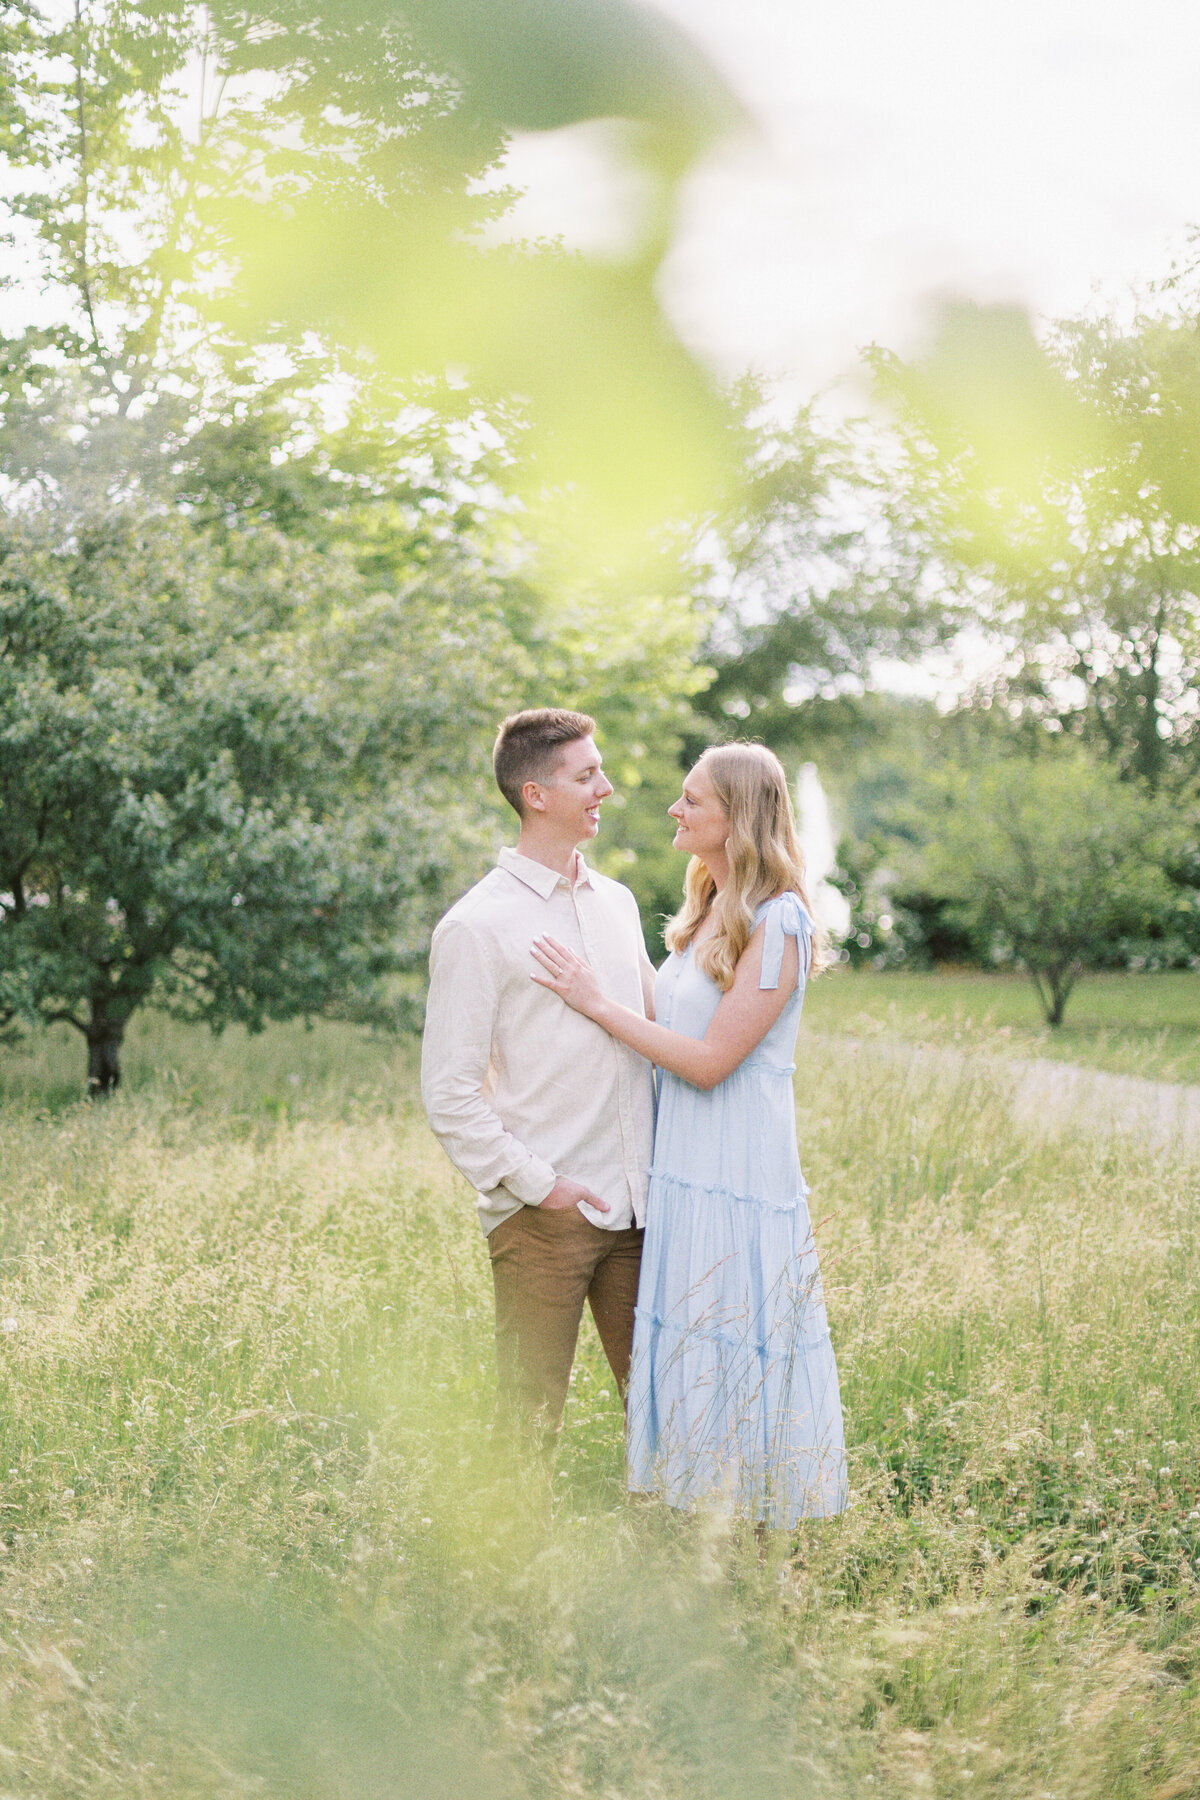 amber-rhea-photography-midwest-wedding-photographer-stl-engagement210A4960